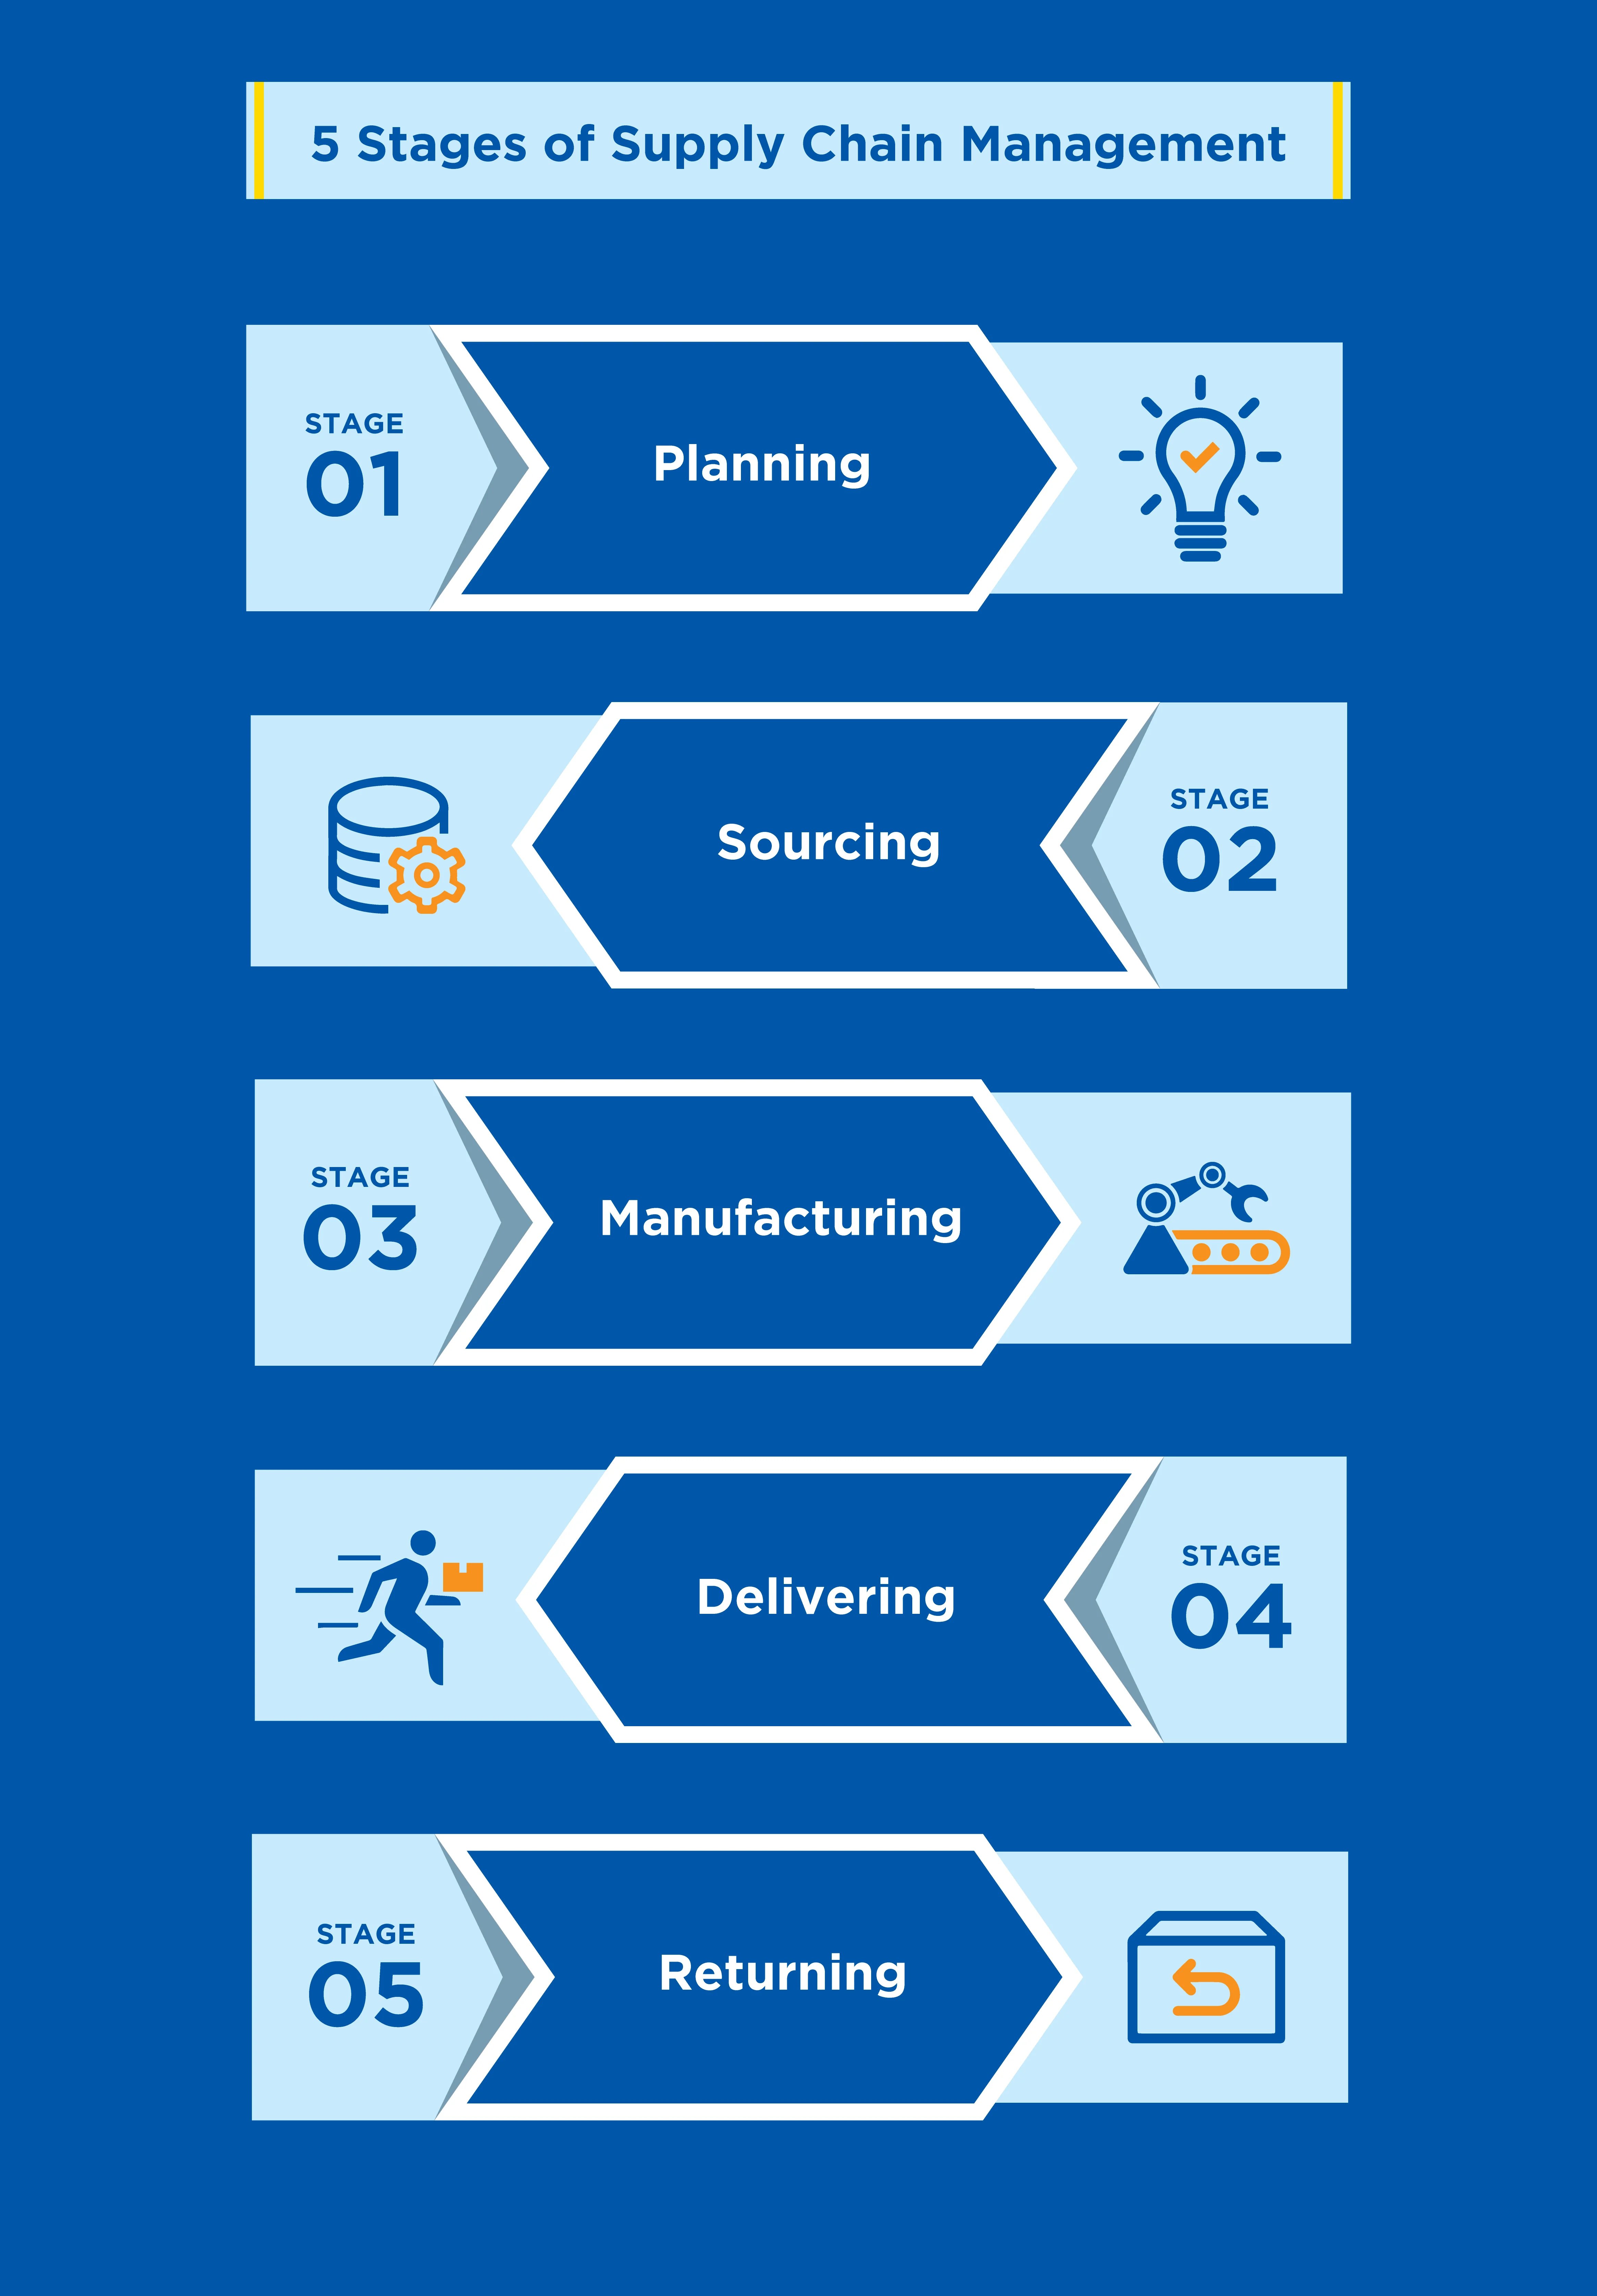 5 Stages of Supply Chain Management